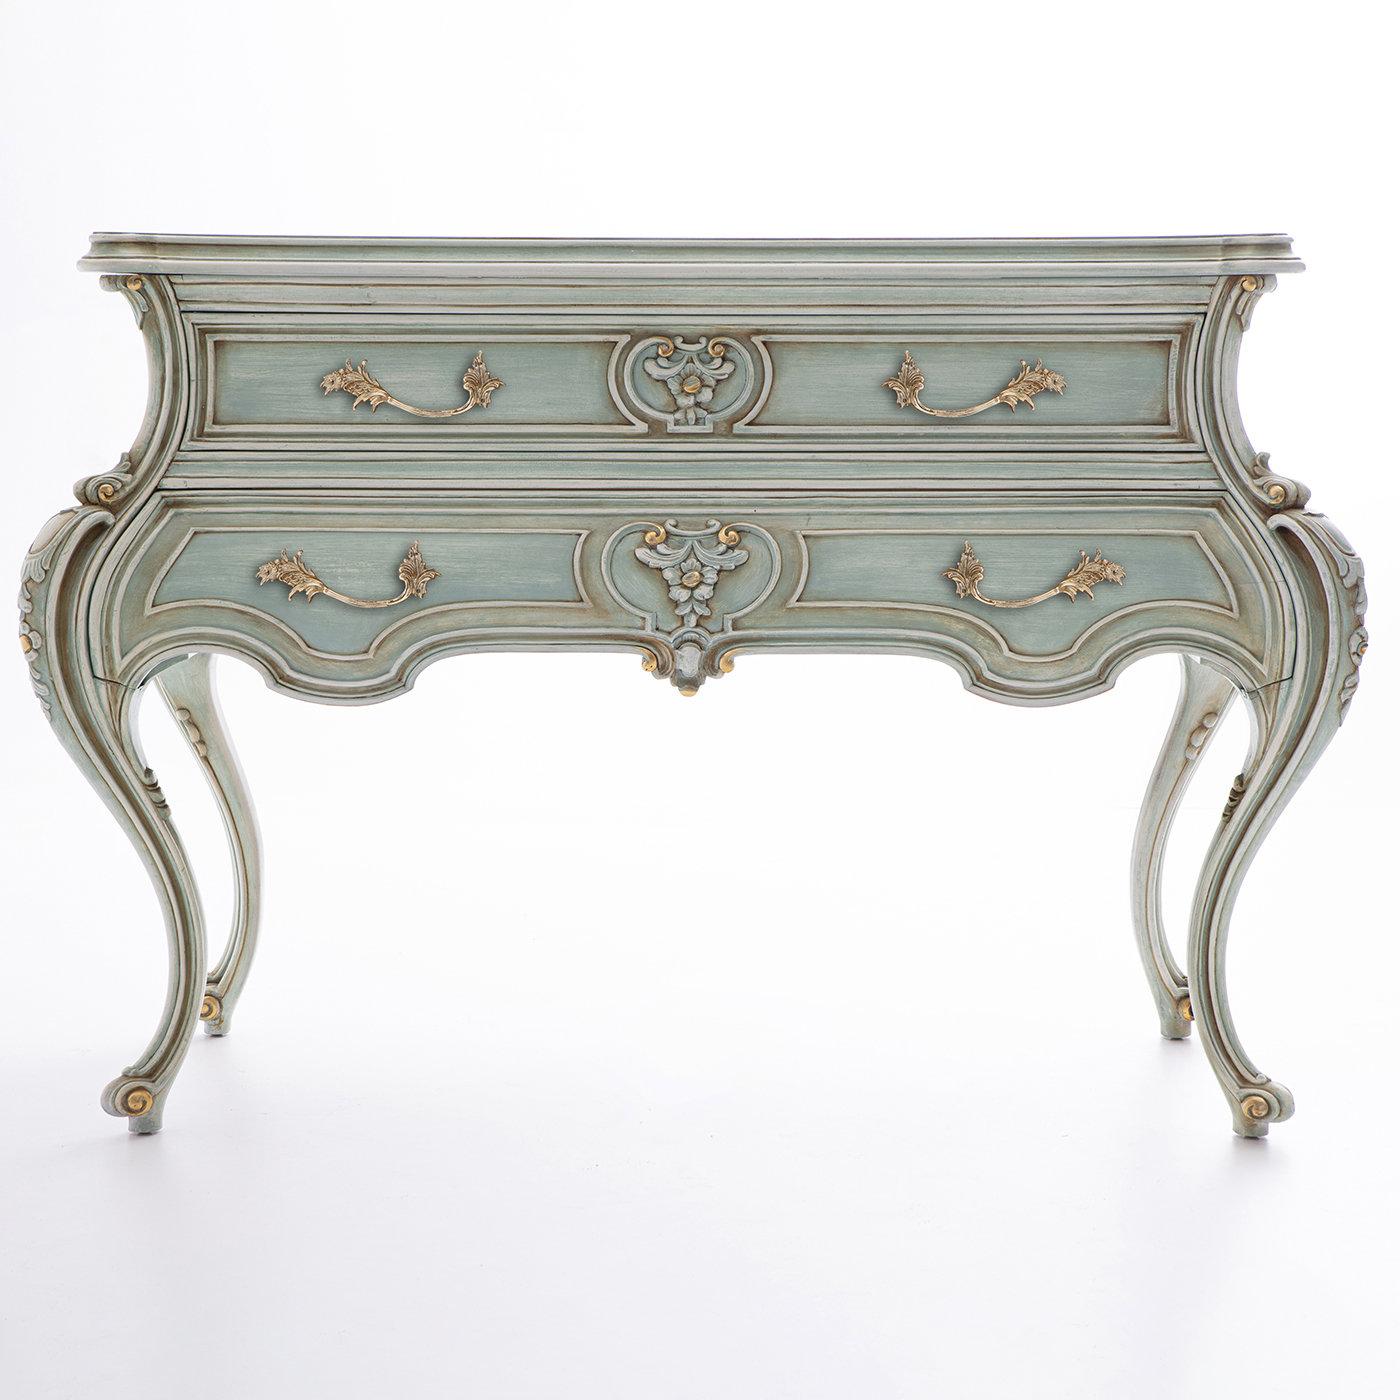 The graceful, sinuous profile of this classic dresser in solid wood contributes to its unparalleled sophistication, emphasized by luminous golden details. Superb carvings executed by hand embellish the cabriole-style legs and the two drawers